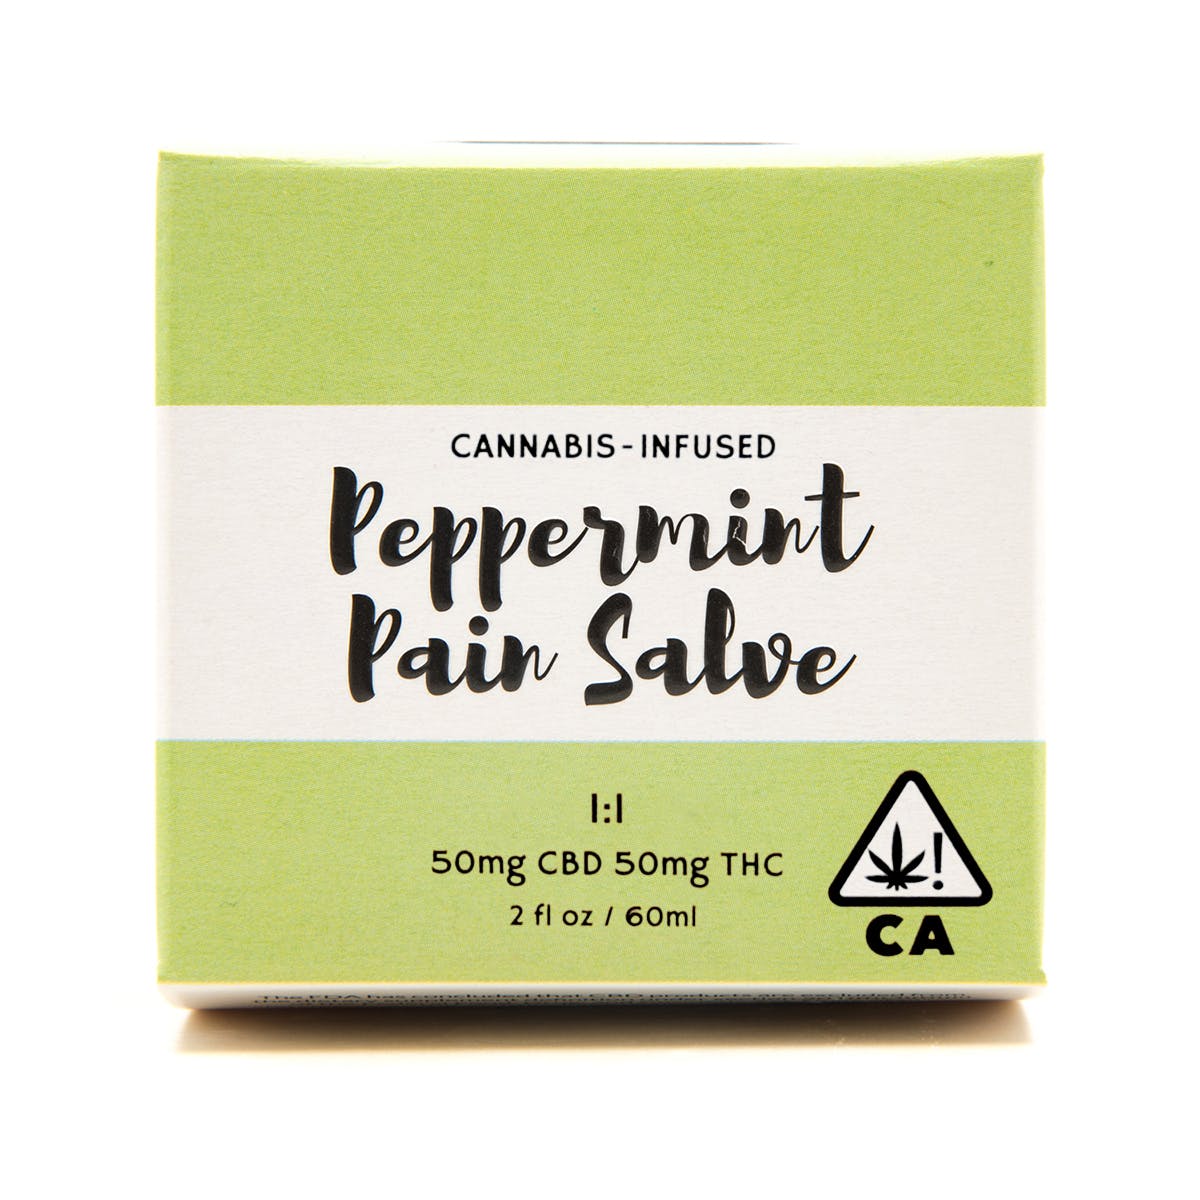 marijuana-dispensaries-the-farmacy-westwood-in-los-angeles-cannabis-infused-peppermint-pain-salve-11